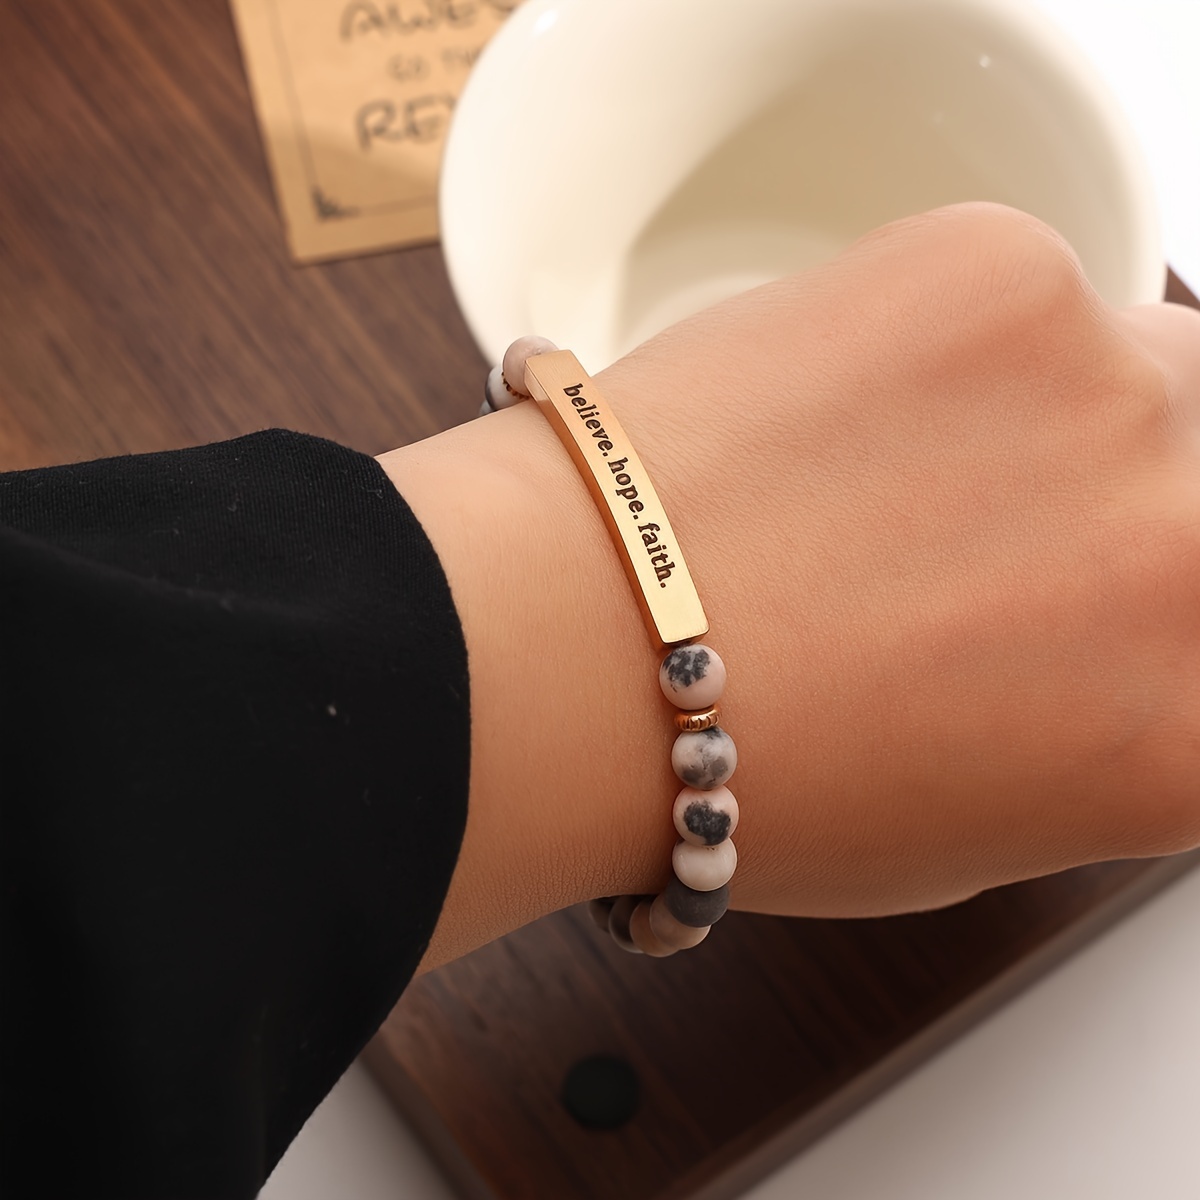 

1 Pc Unique Natural Stones With Wooden Rectangle Letter Engraved Bracelet Elegant Leisure Style For Women Daily Casual